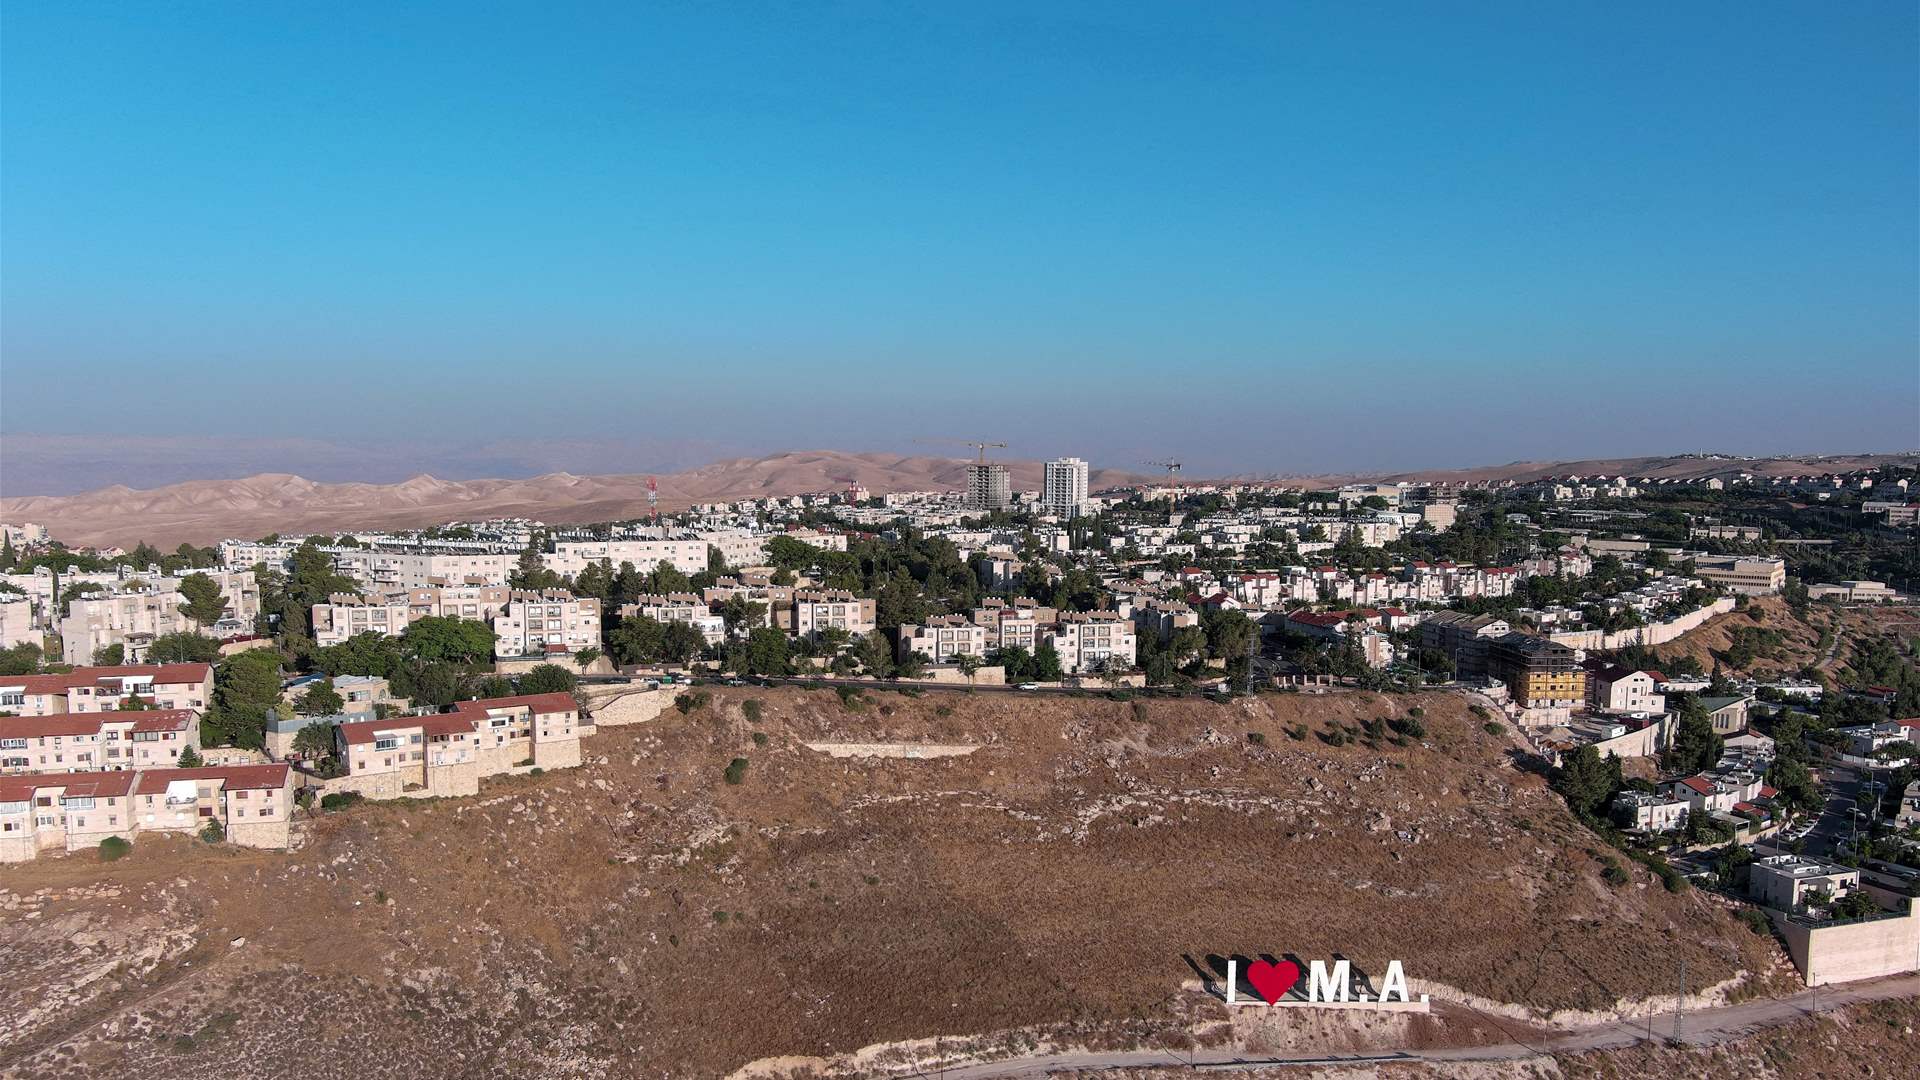 Israel appropriates 650 acres of West Bank land near big settlement